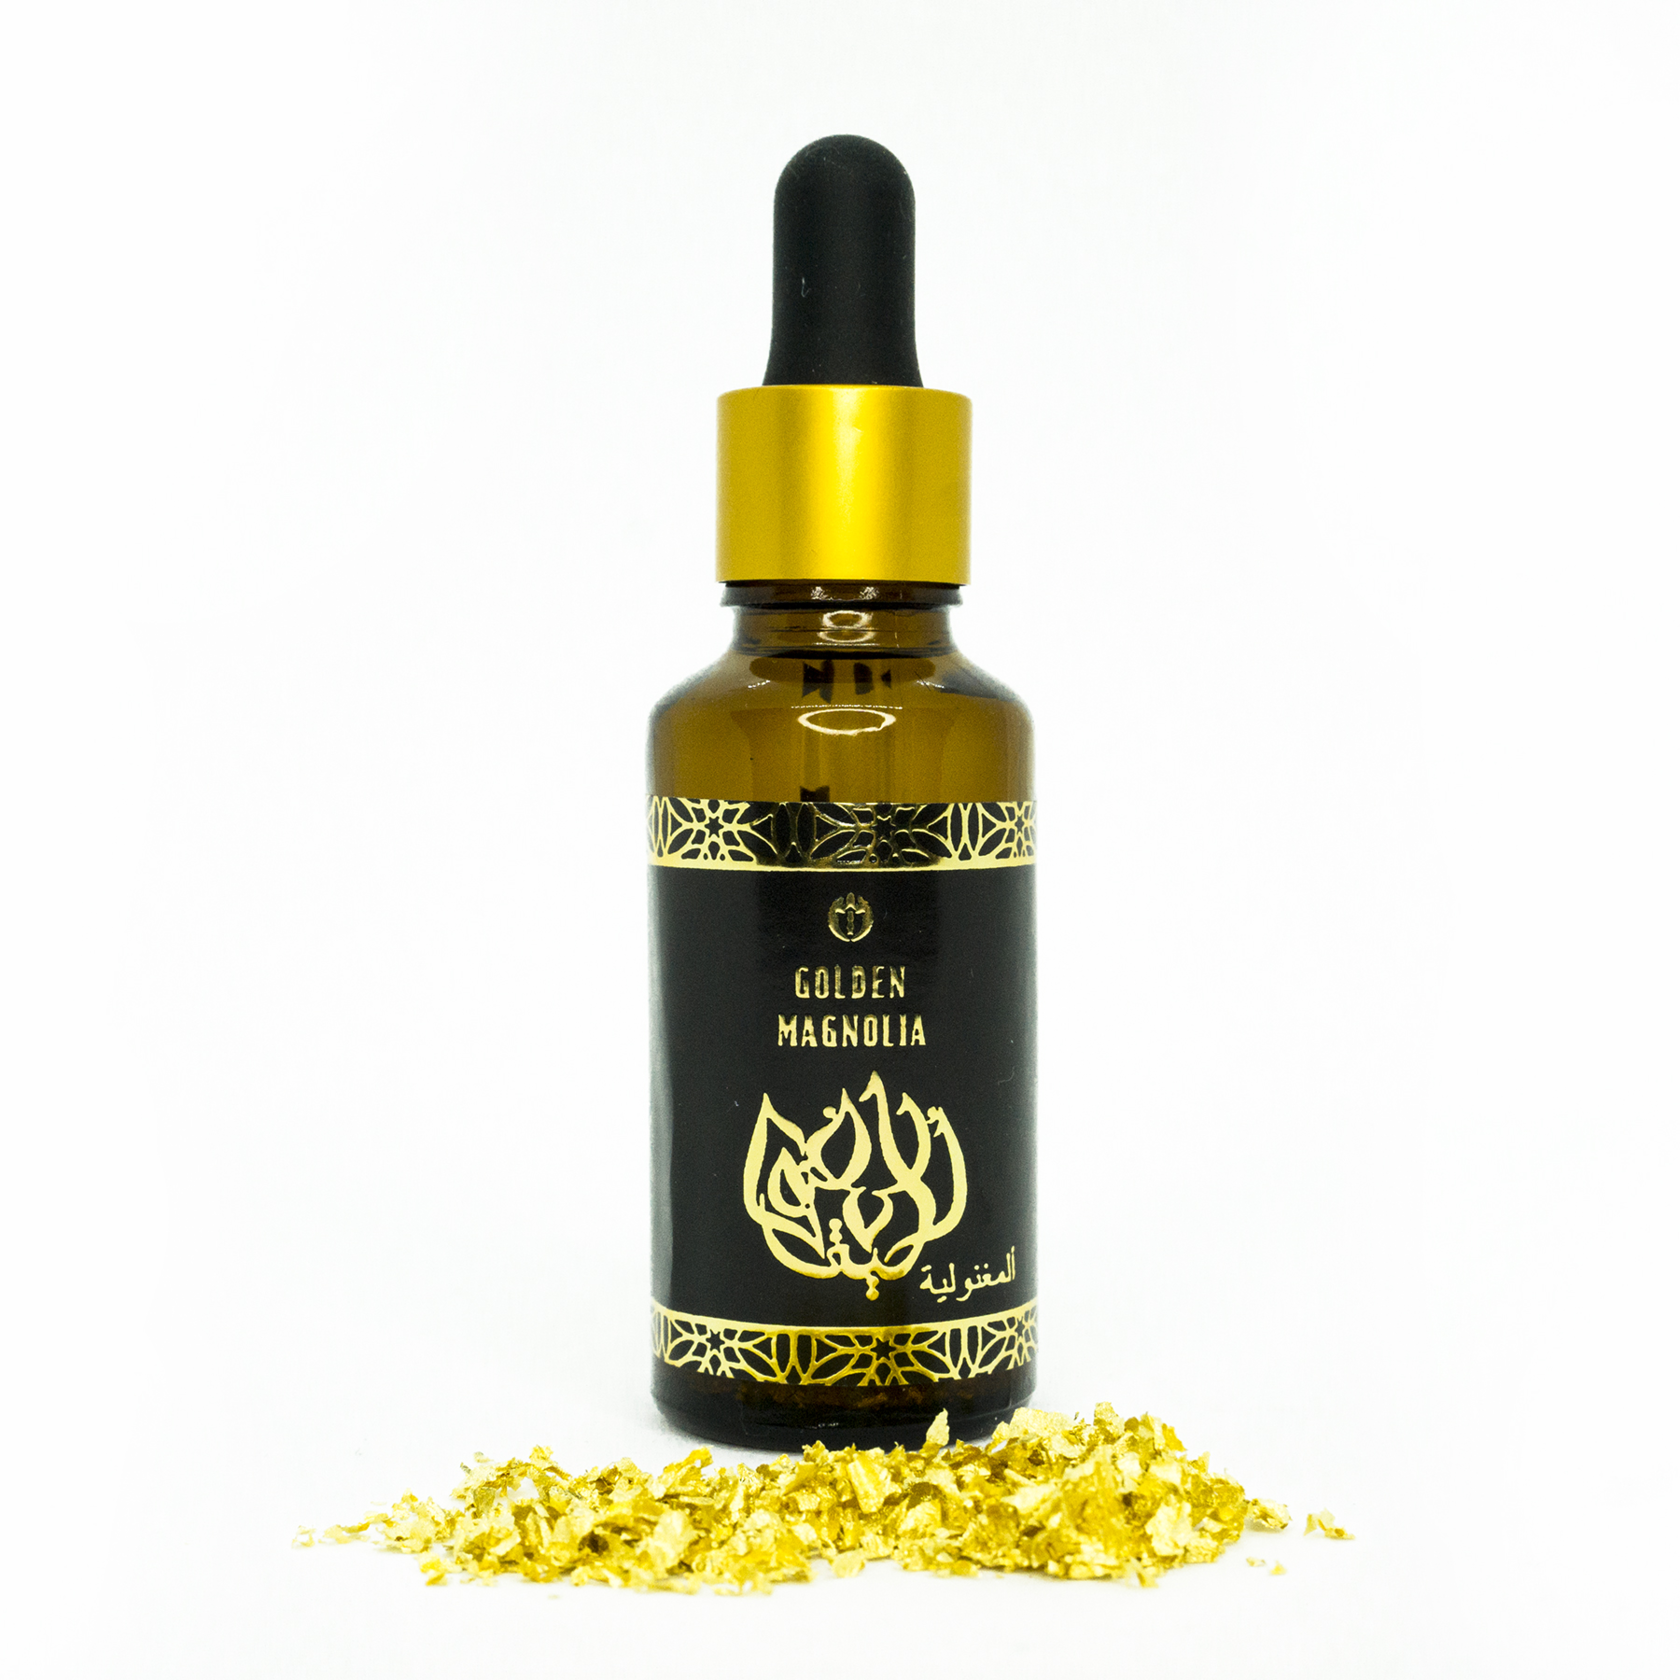 Golden MAGNOLIA aroma oil with & nbsp; cosmetic gold